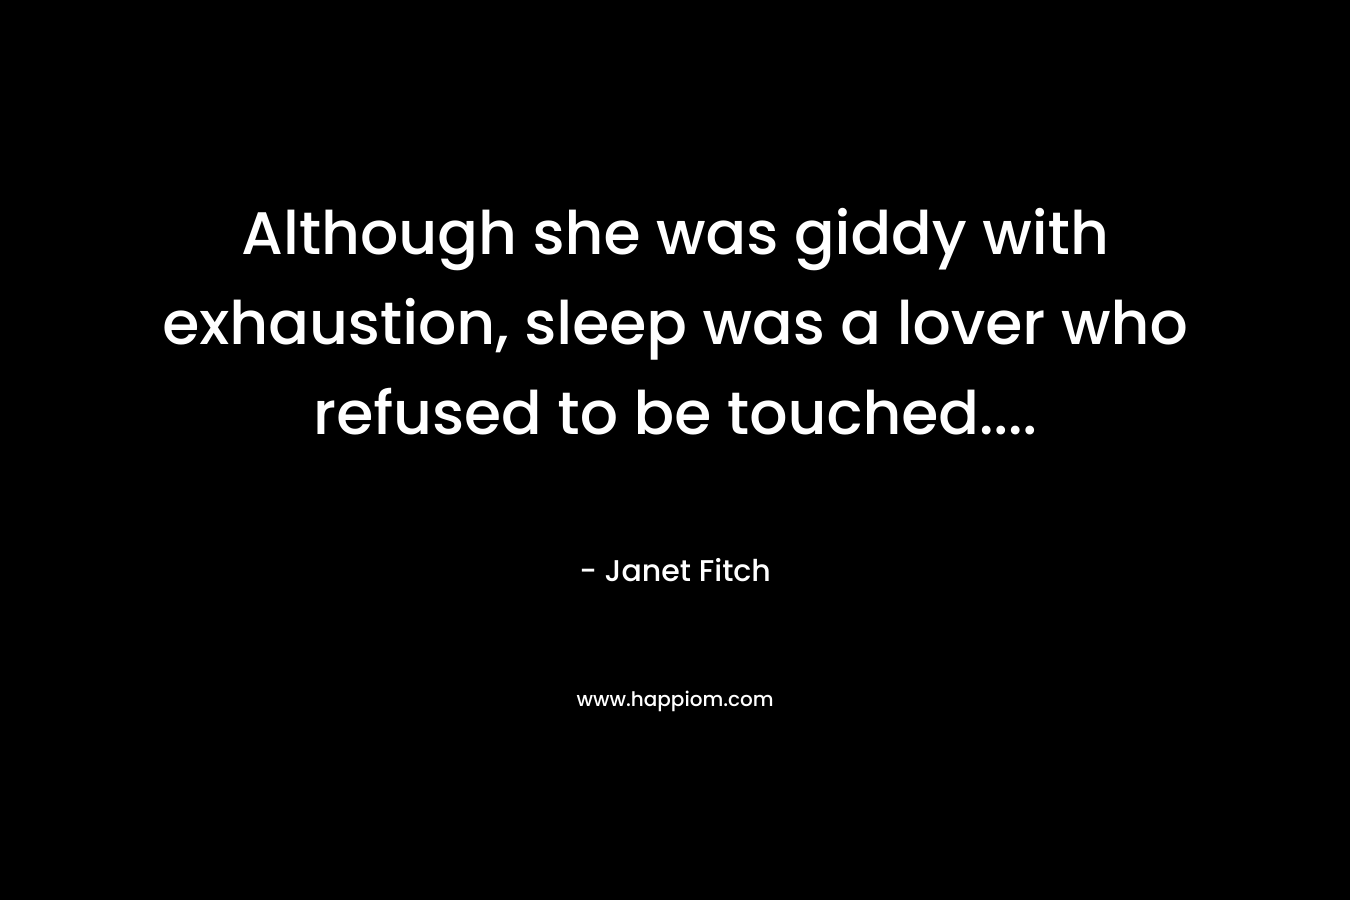 Although she was giddy with exhaustion, sleep was a lover who refused to be touched....